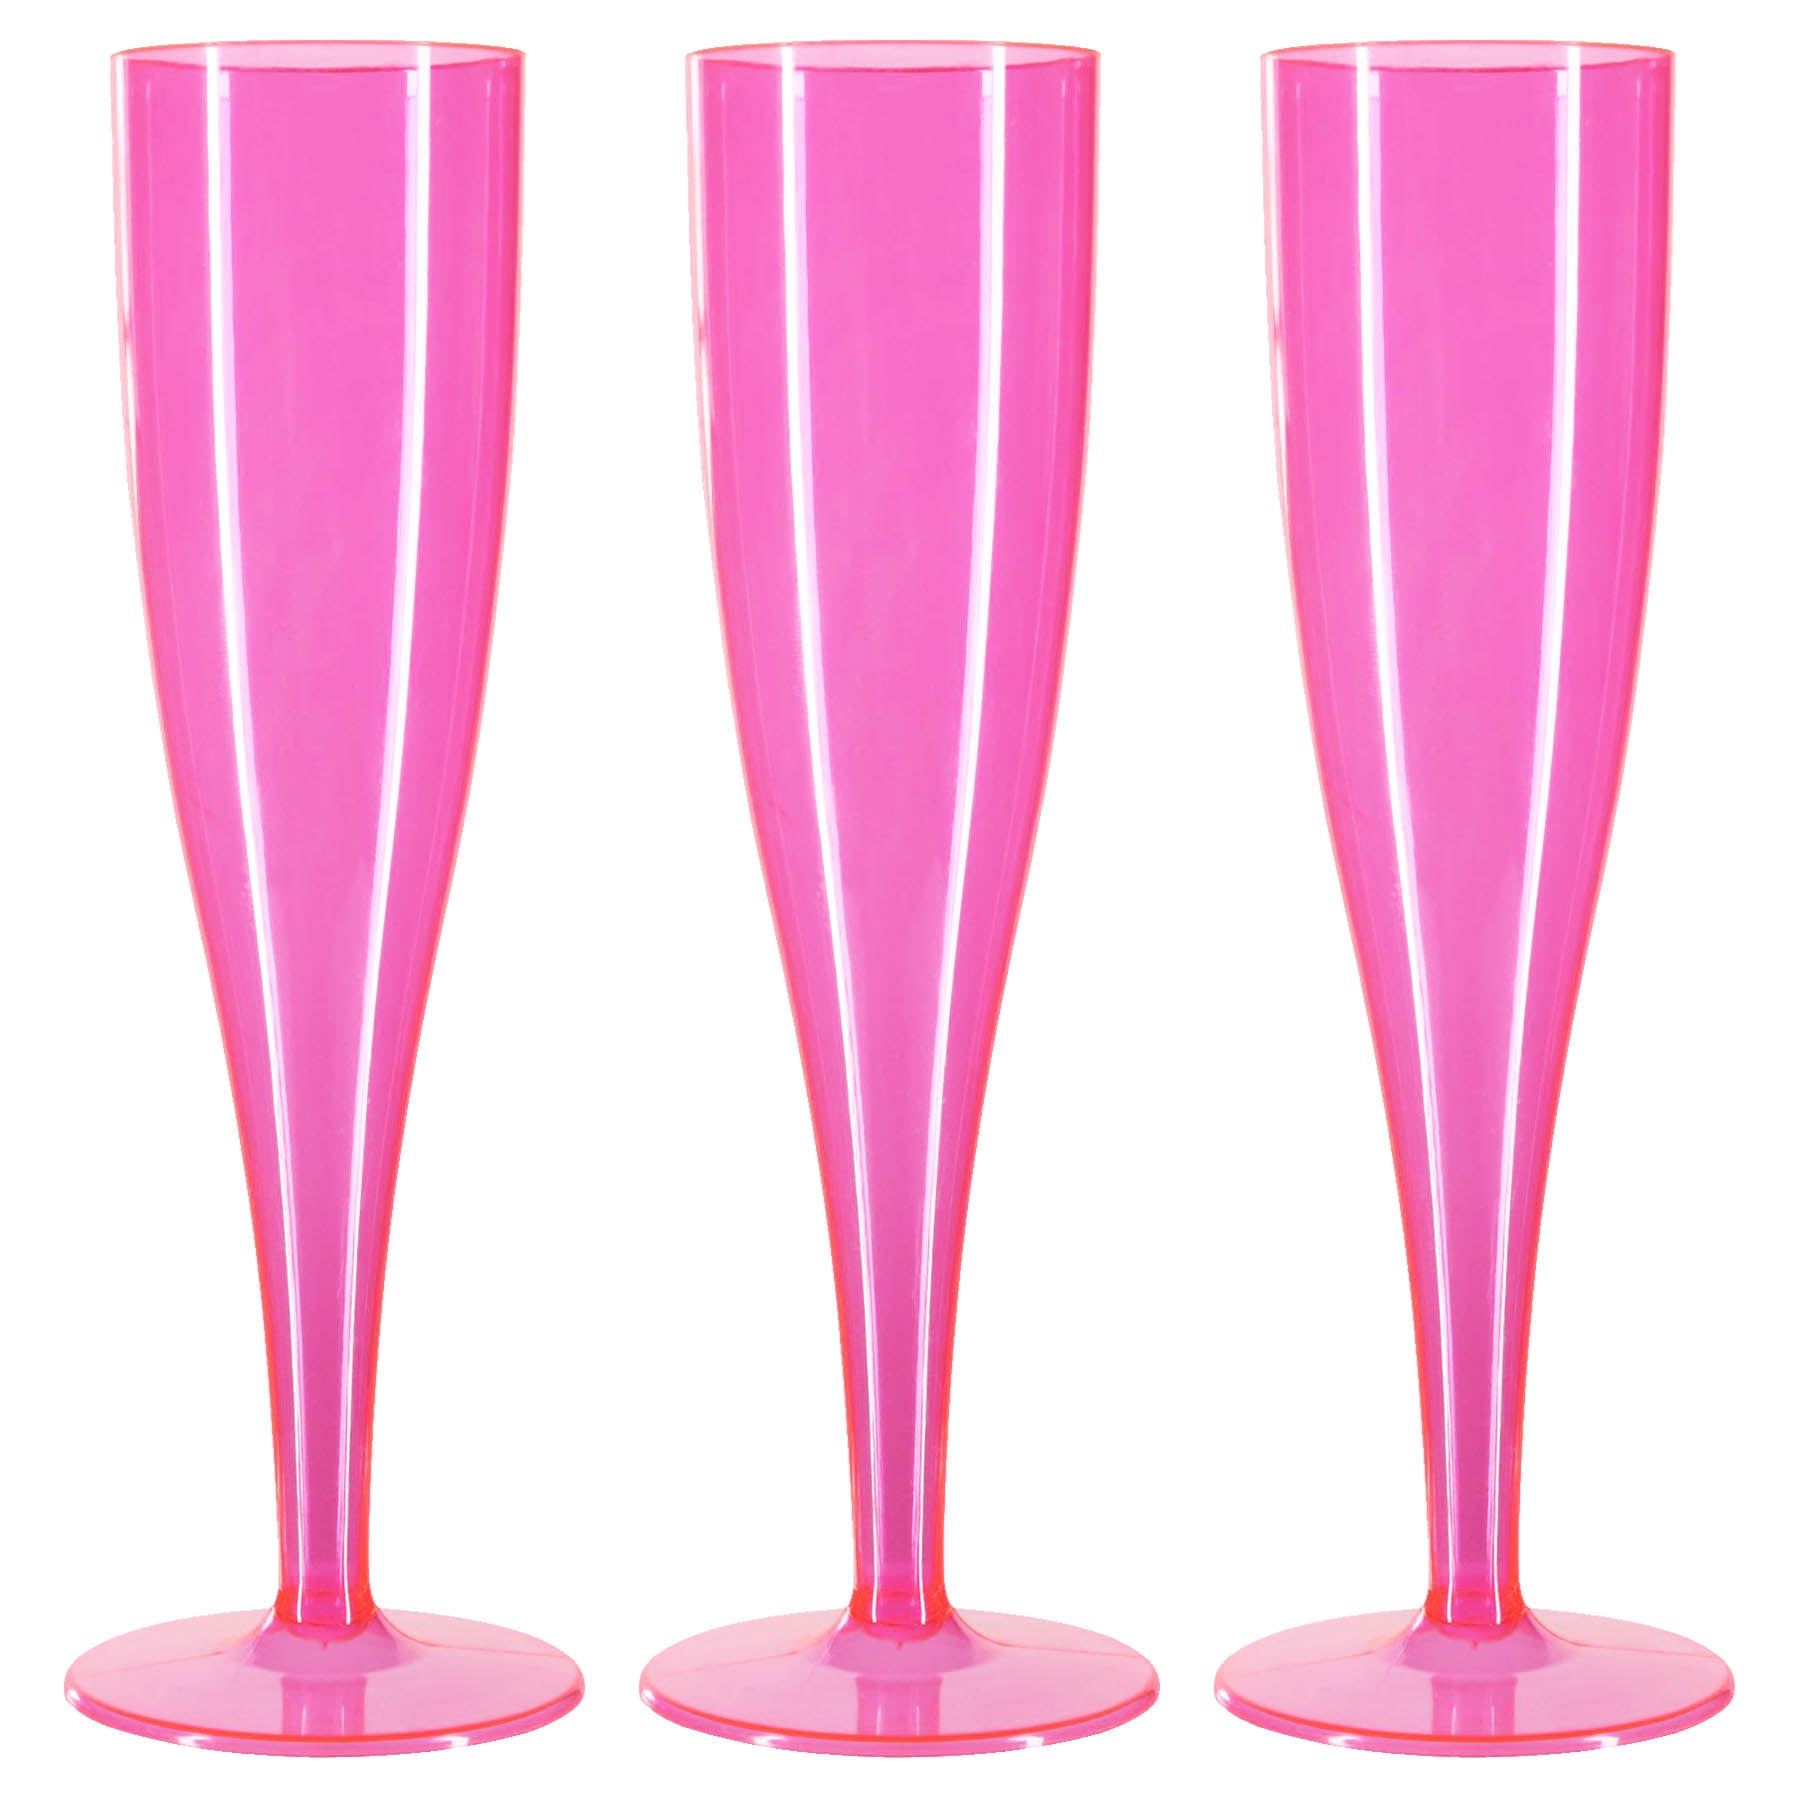 10 x Pink Prosecco Flutes 175ml 6oz Capacity Recyclable Polystyrene Material Transparent 1-Piece Sturdy Champagne Glasses BBQs Picnics-5056020107125-PCUP-CHAMPPINK-Product Pro-Champagne Glasses, Clear Champagne Glasses, Pink, Plastic Flutes, Prosecco Flutes